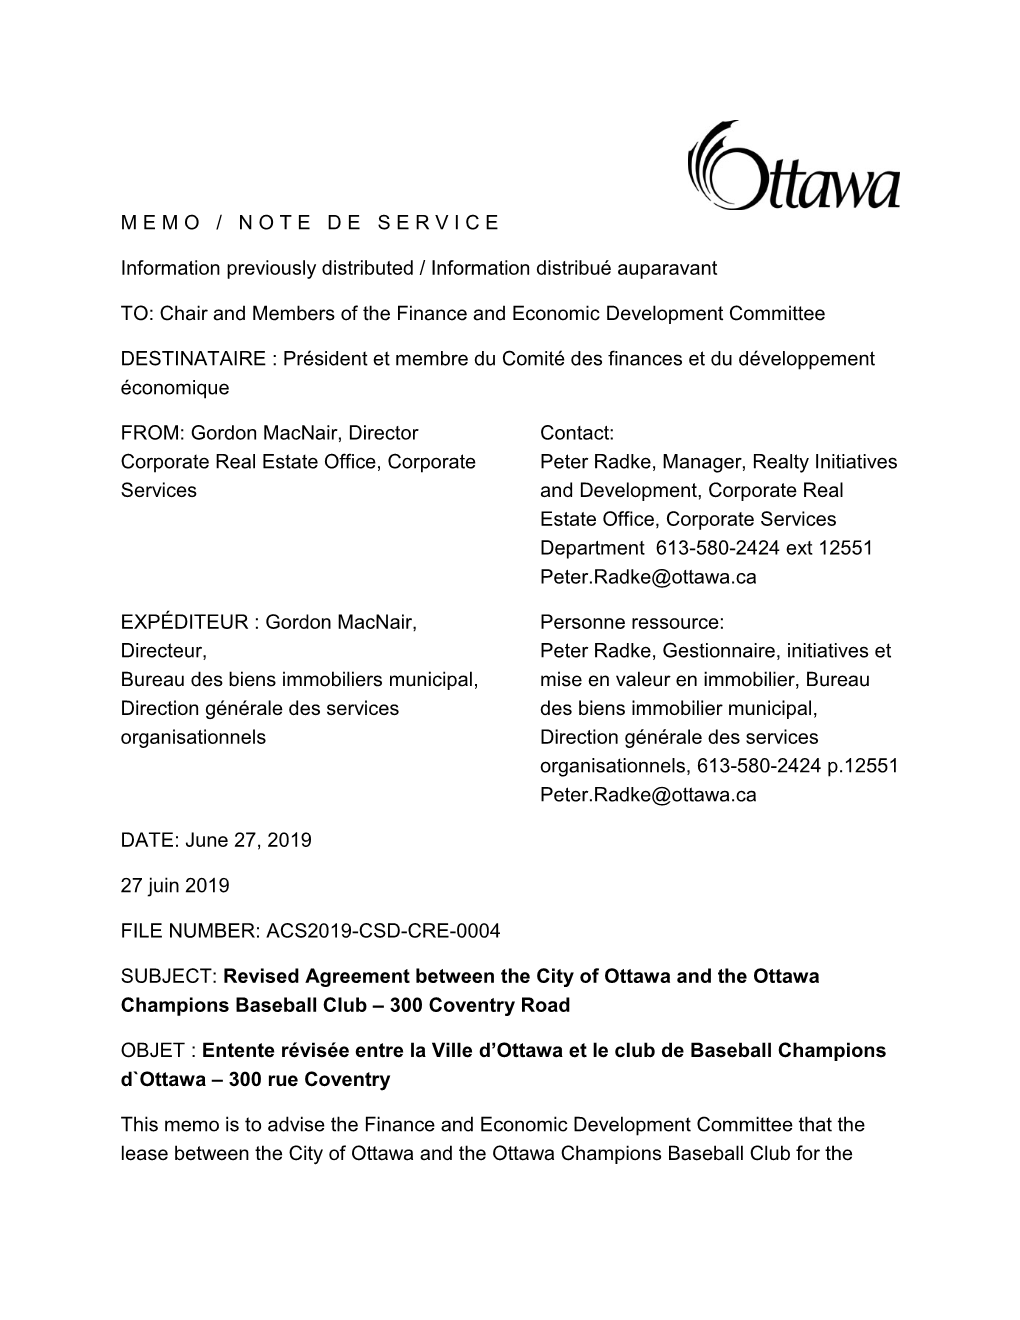 Revised Agreement Between the City of Ottawa and the Ottawa Champions Baseball Club – 300 Coventry Road